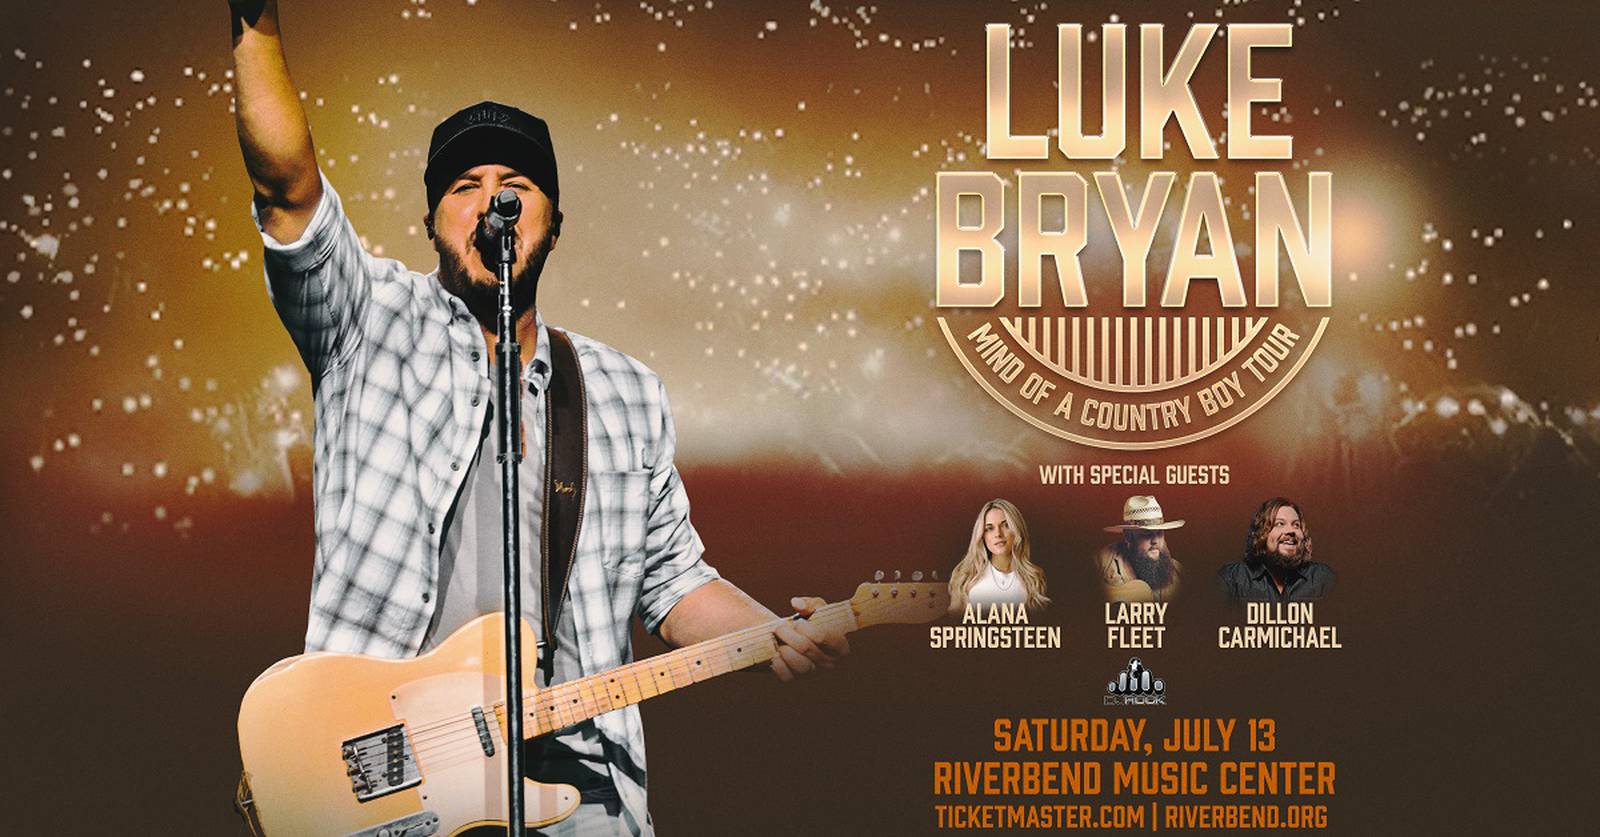 Win Tickets To See Luke Bryan At Riverbend Music Center K99.1FM